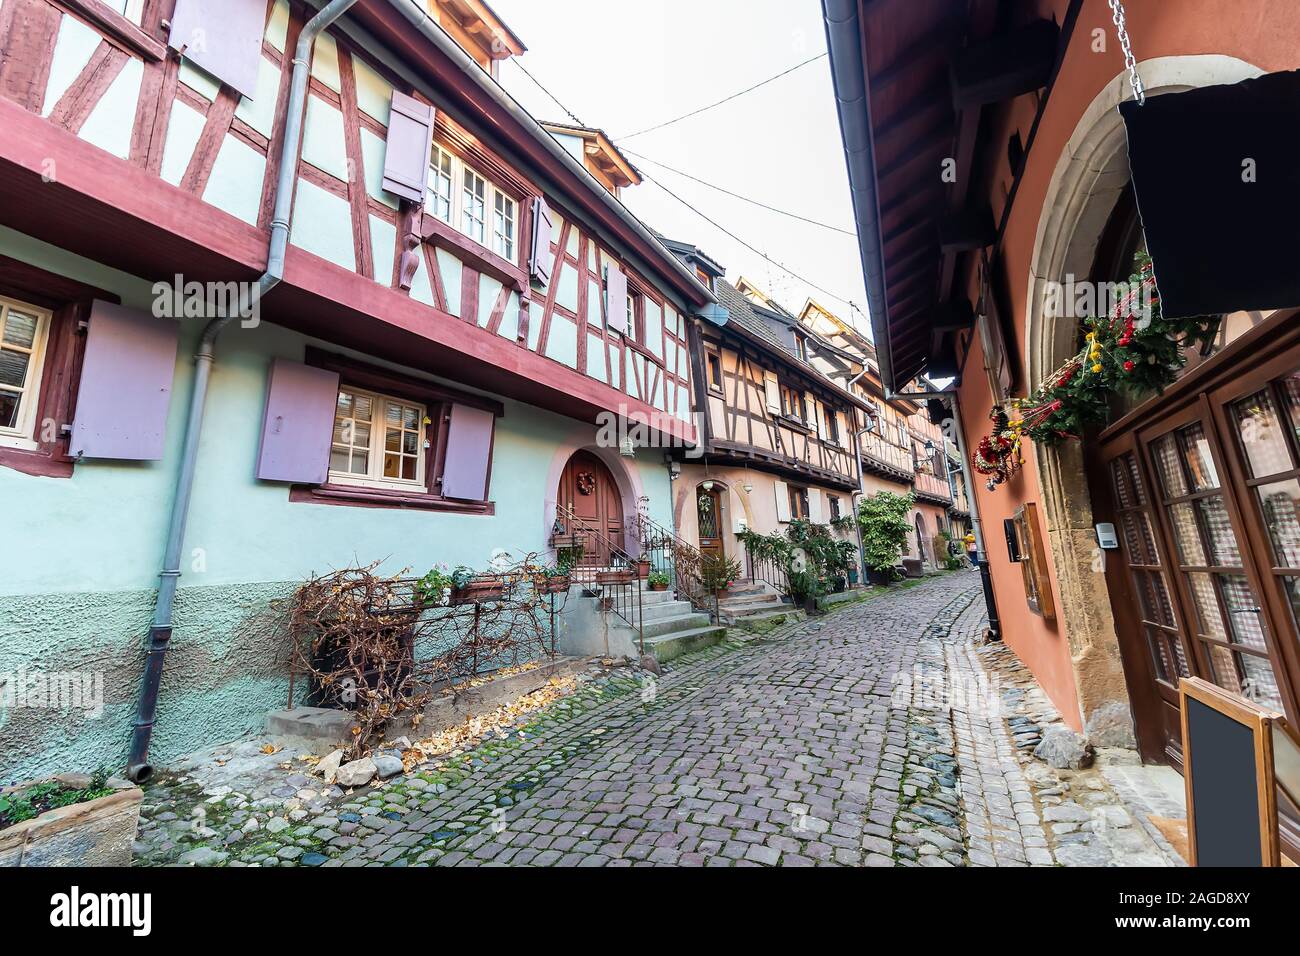 Traditional colorful half-timbered houses in Eguisheim Old Town on Alsace Wine Route decorated at Christmas, France Stock Photo